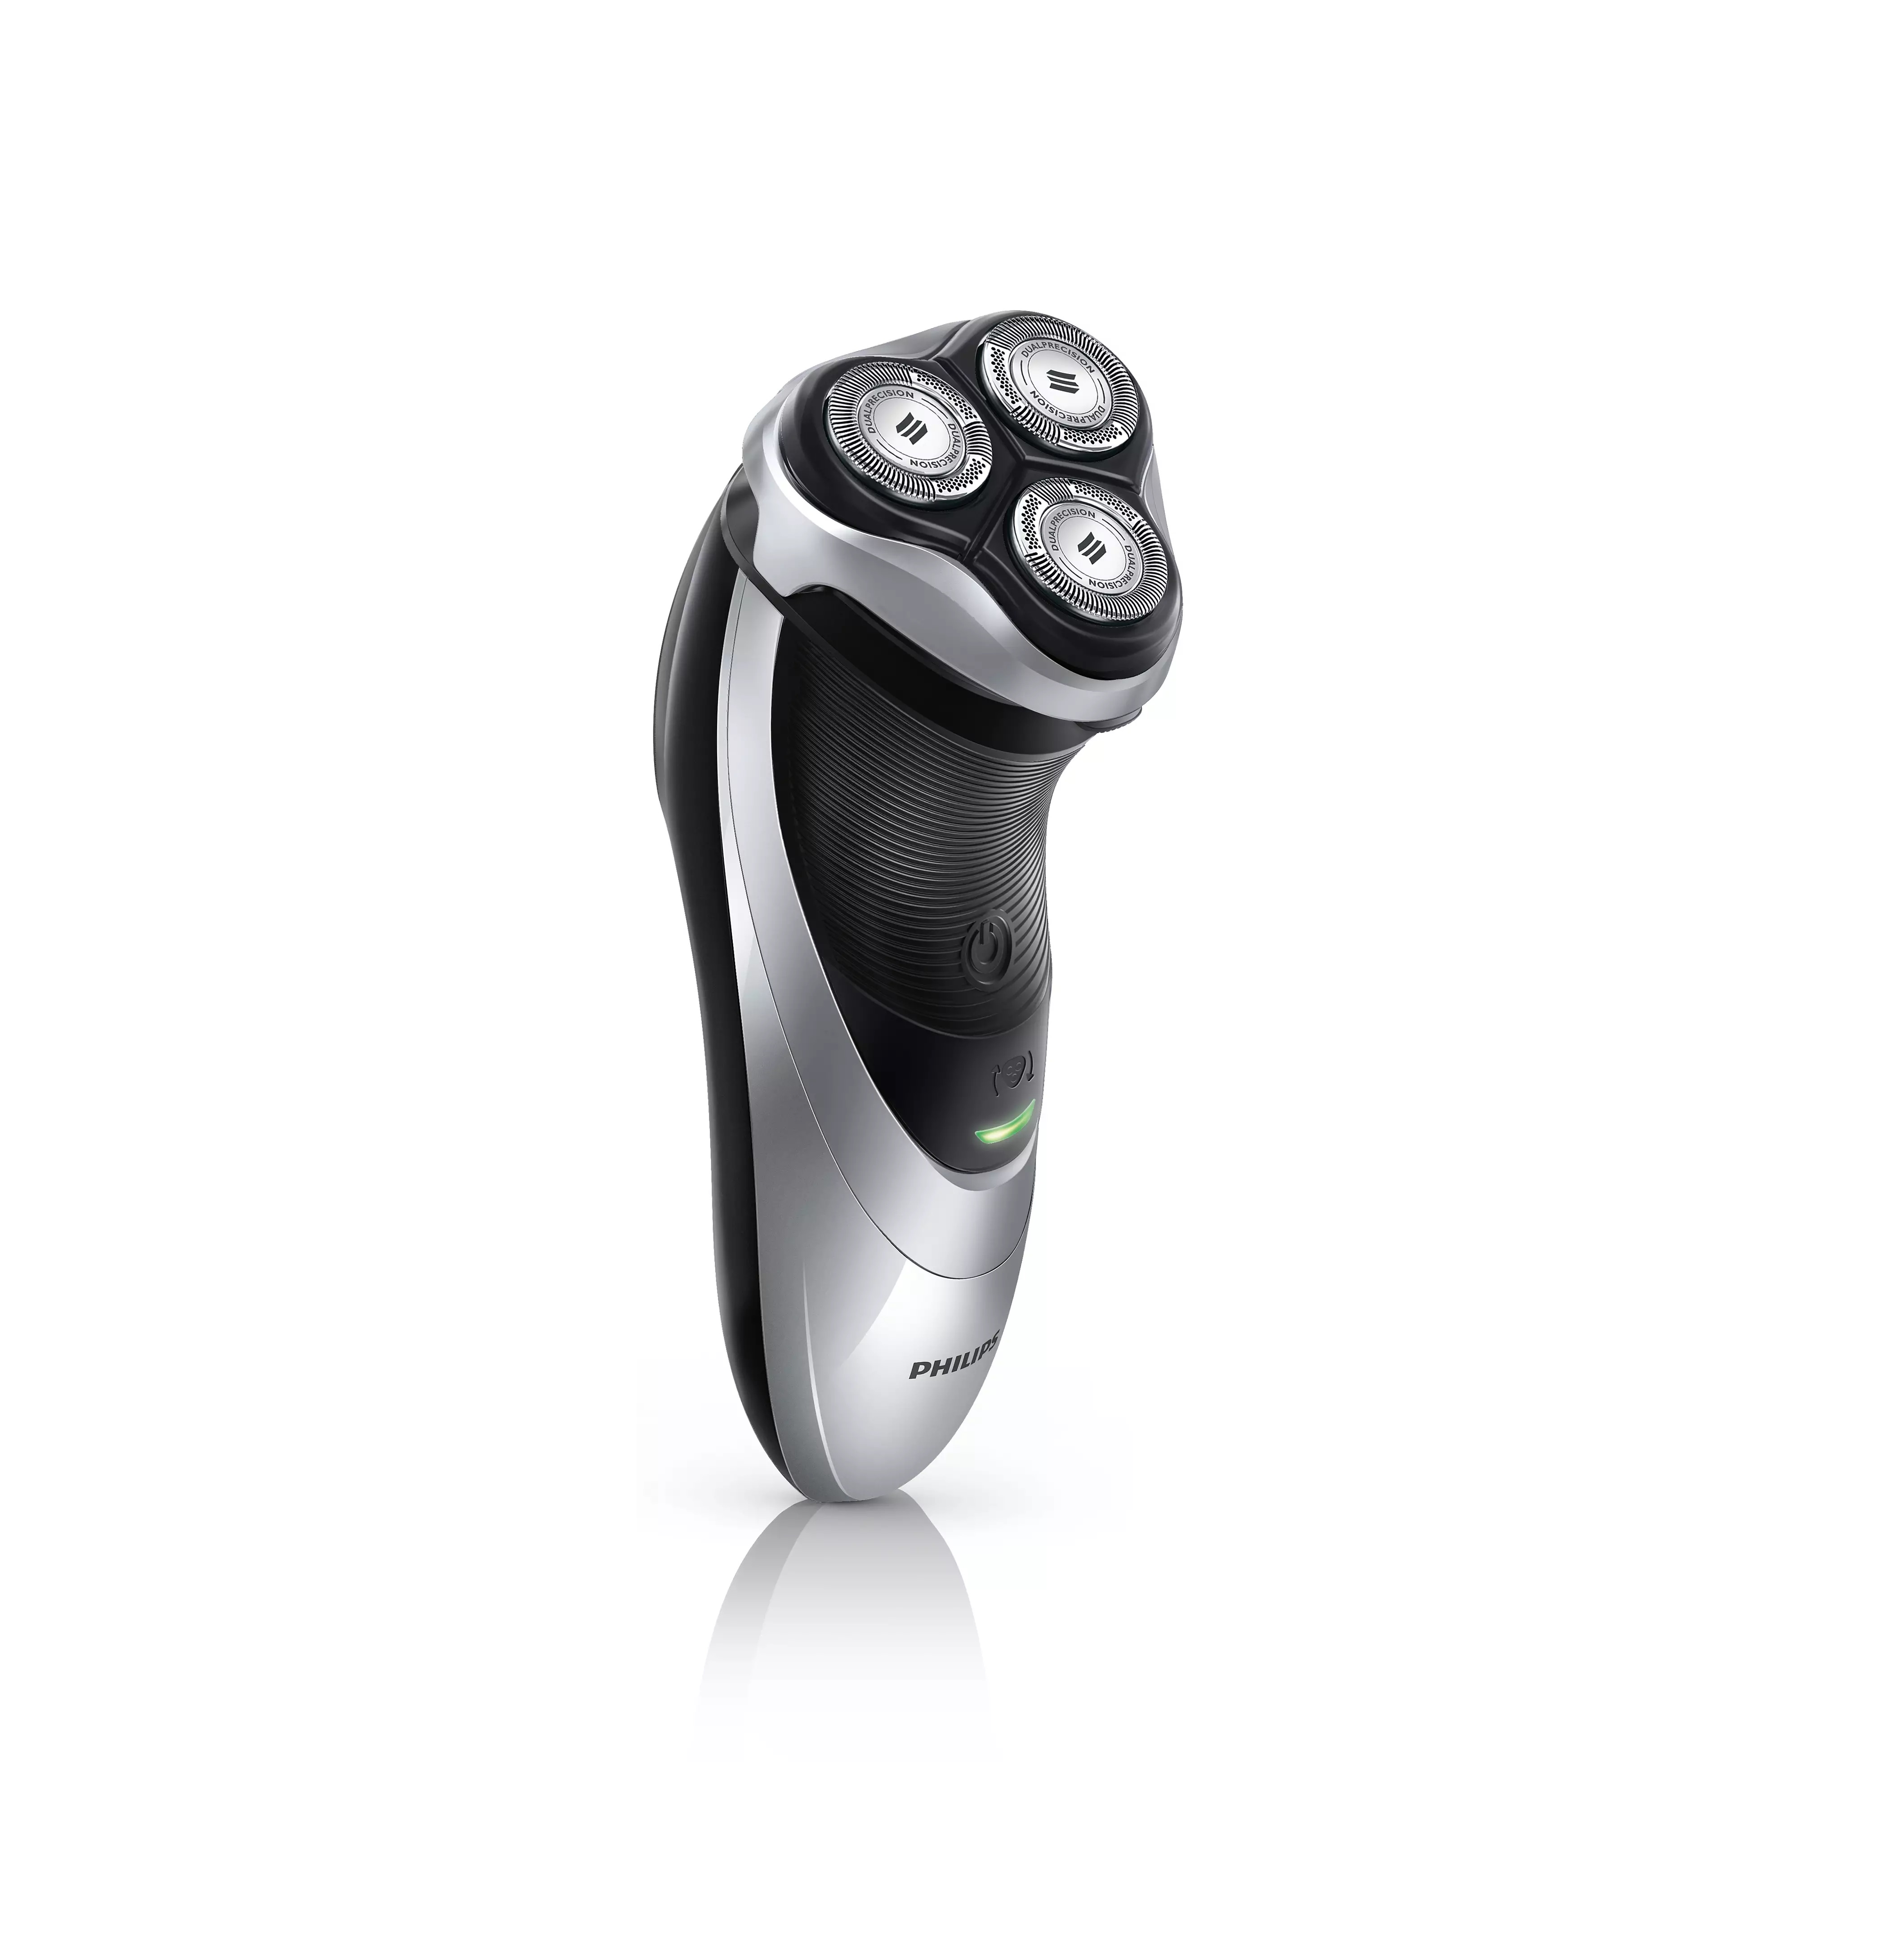 Philips Powertouch Plus Cordless Shaver, Icy Silver, PT860